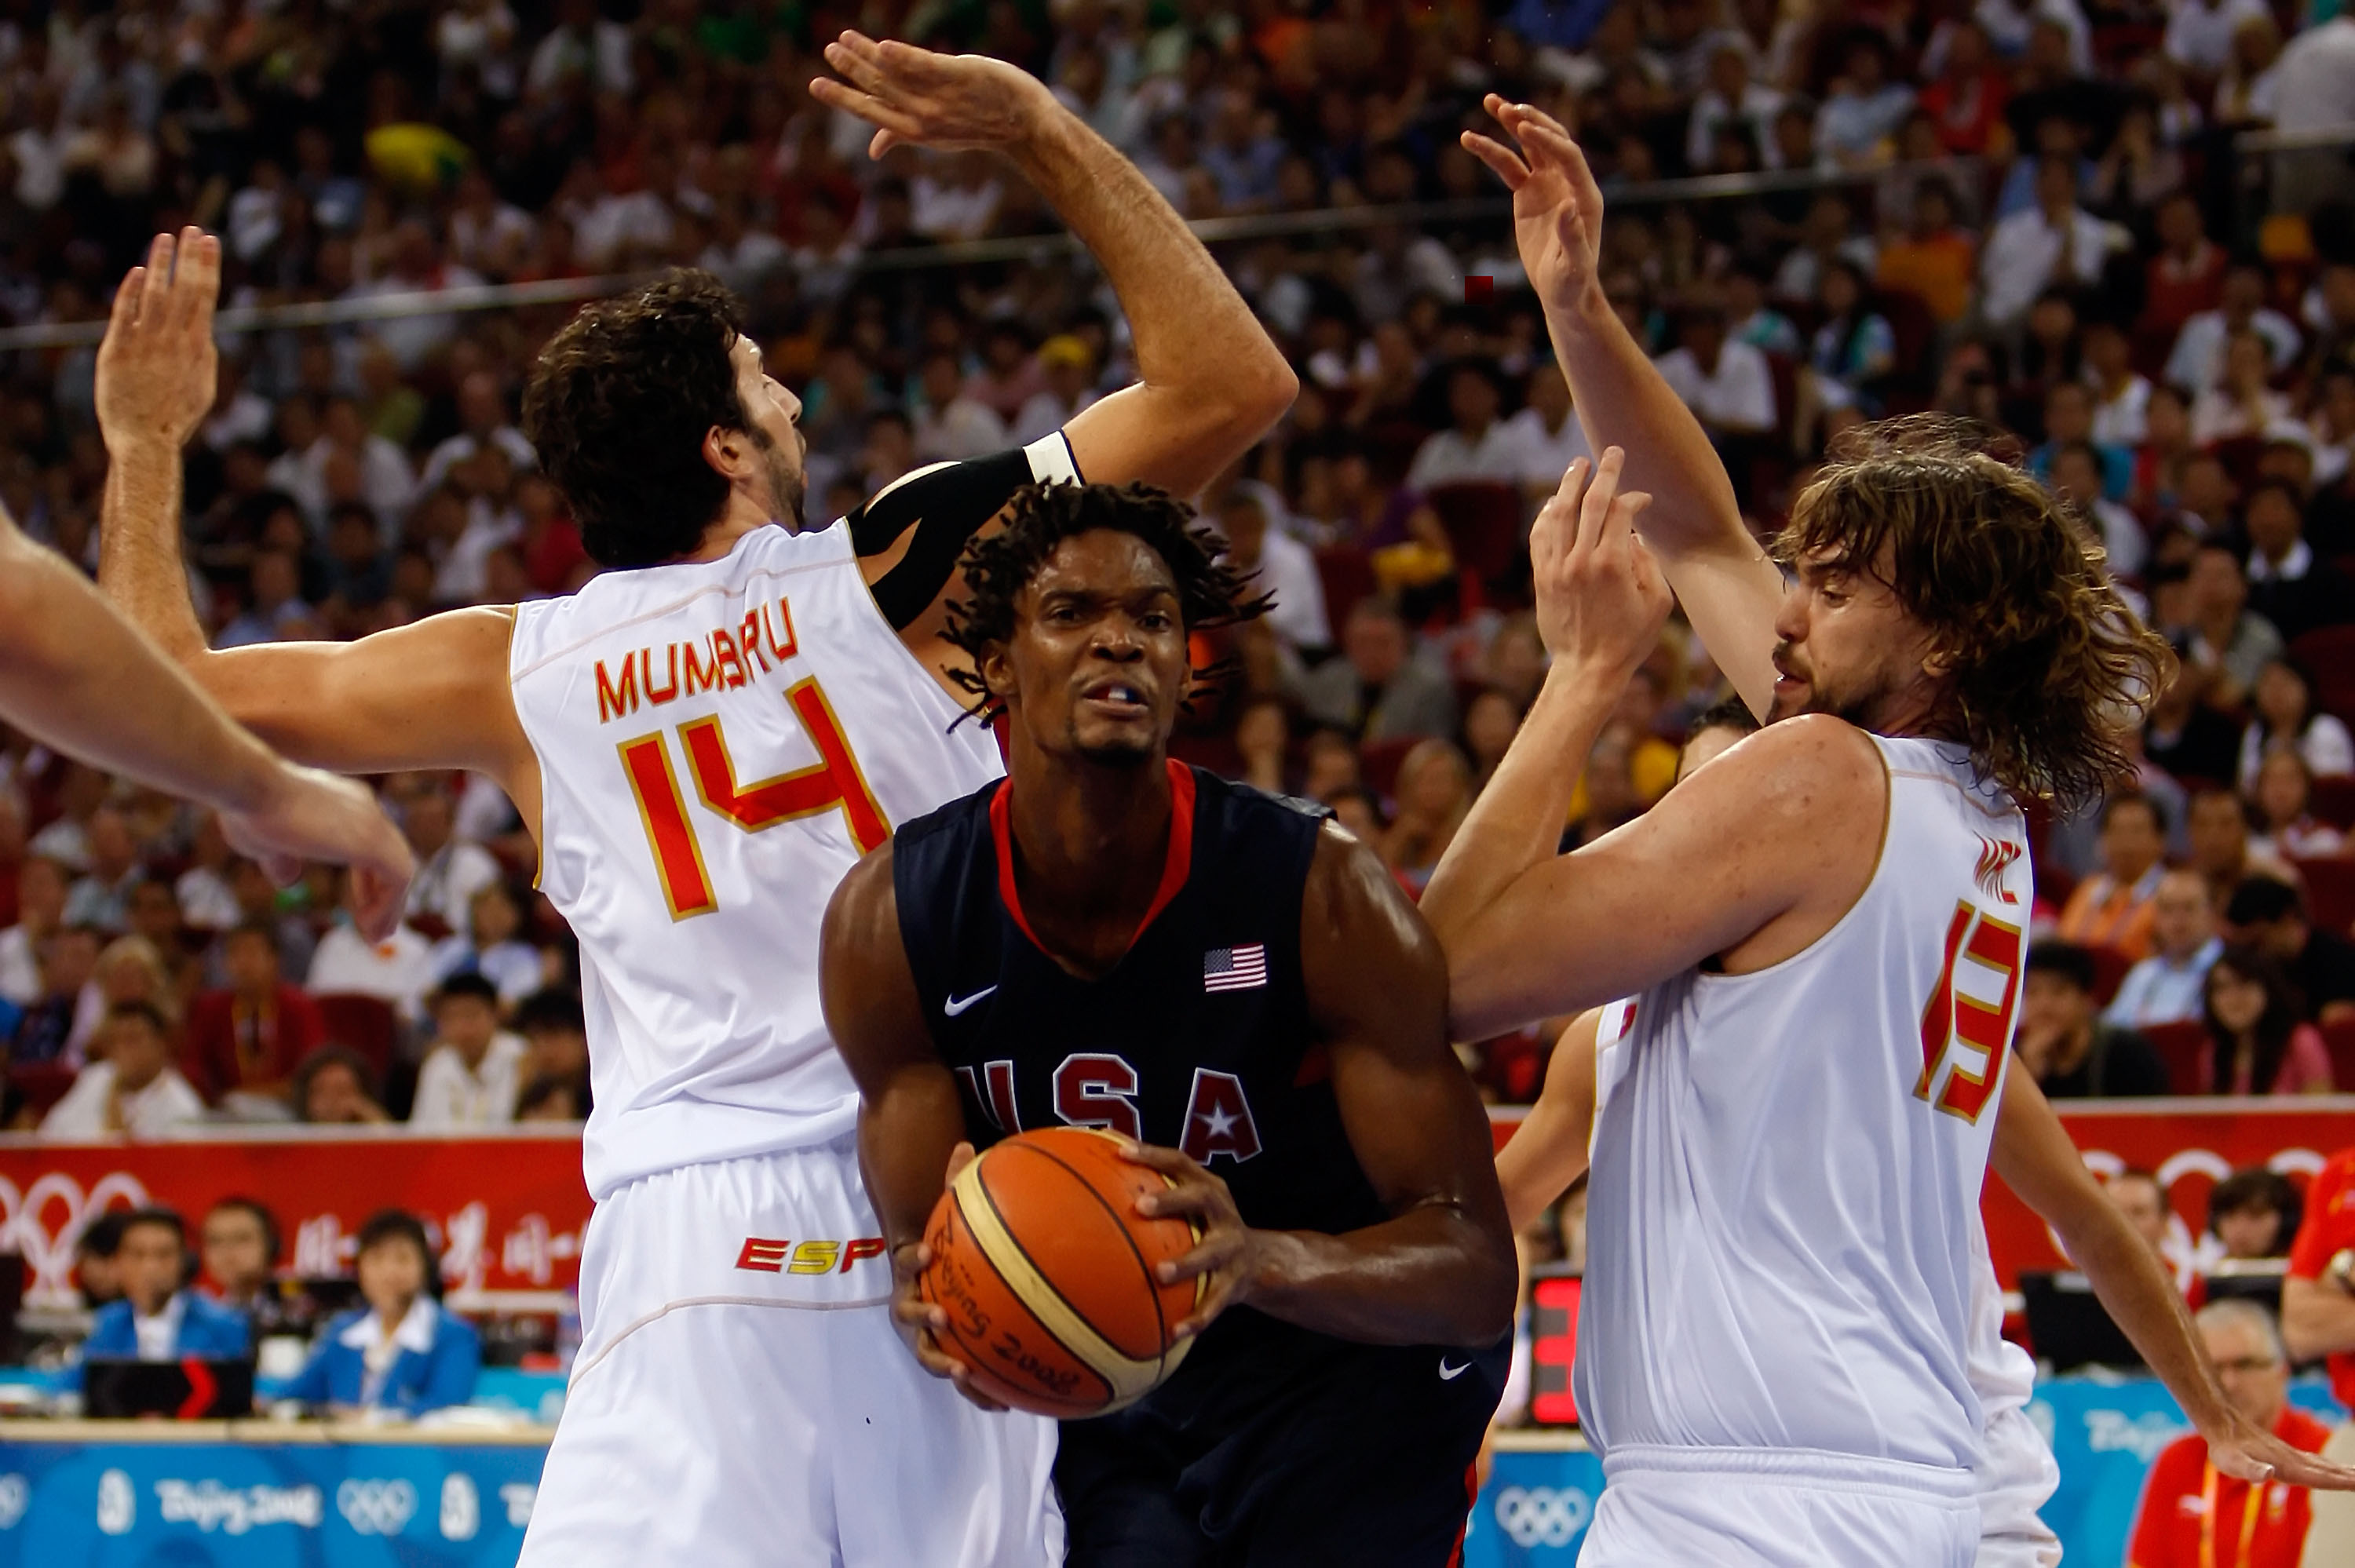 BEIJING - AUGUST 24:  Chris Bosh #12 of the United States moves against the defense of Alex Mumbru #14 and Marc Gasol #13 of Spain in the gold medal game during Day 16 of the Beijing 2008 Olympic Games at the Beijing Olympic Basketball Gymnasium on August